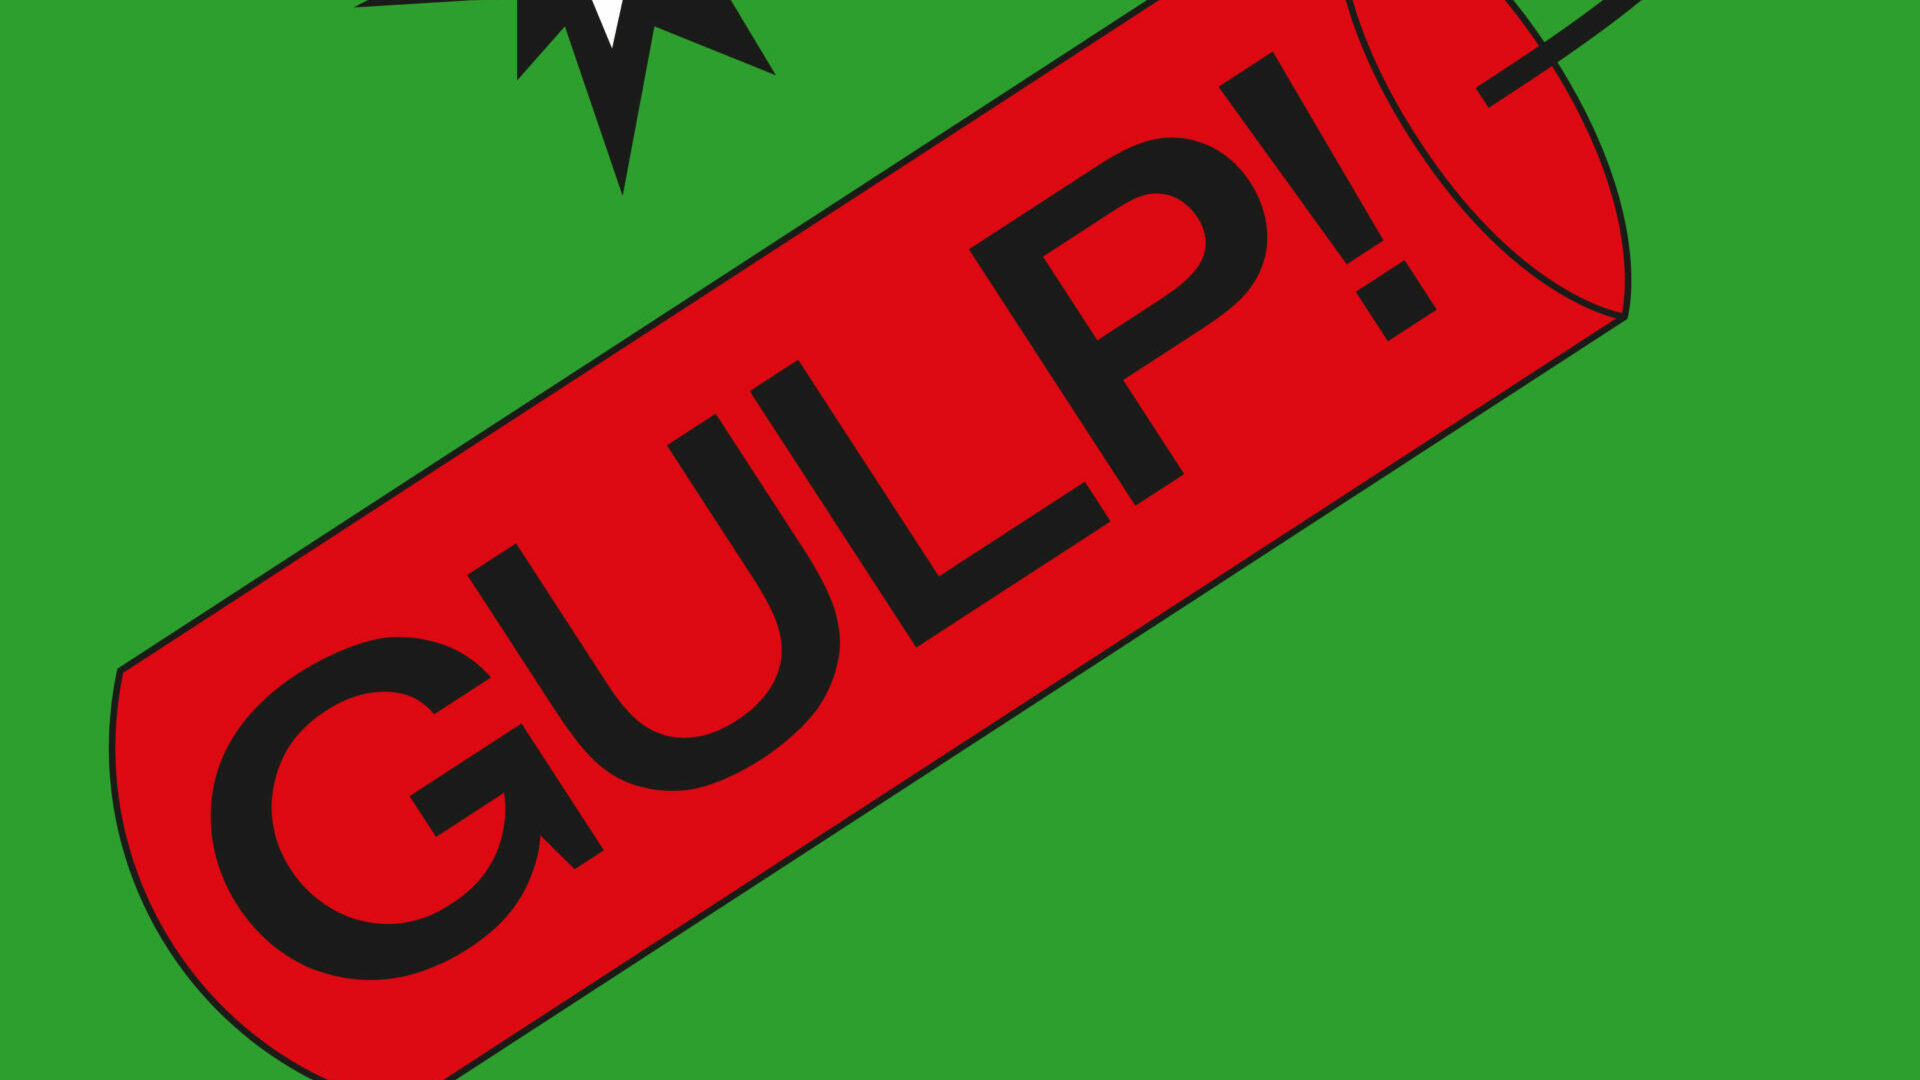 Sports Team 'Gulp!' review: indie rockers aim for the big leagues